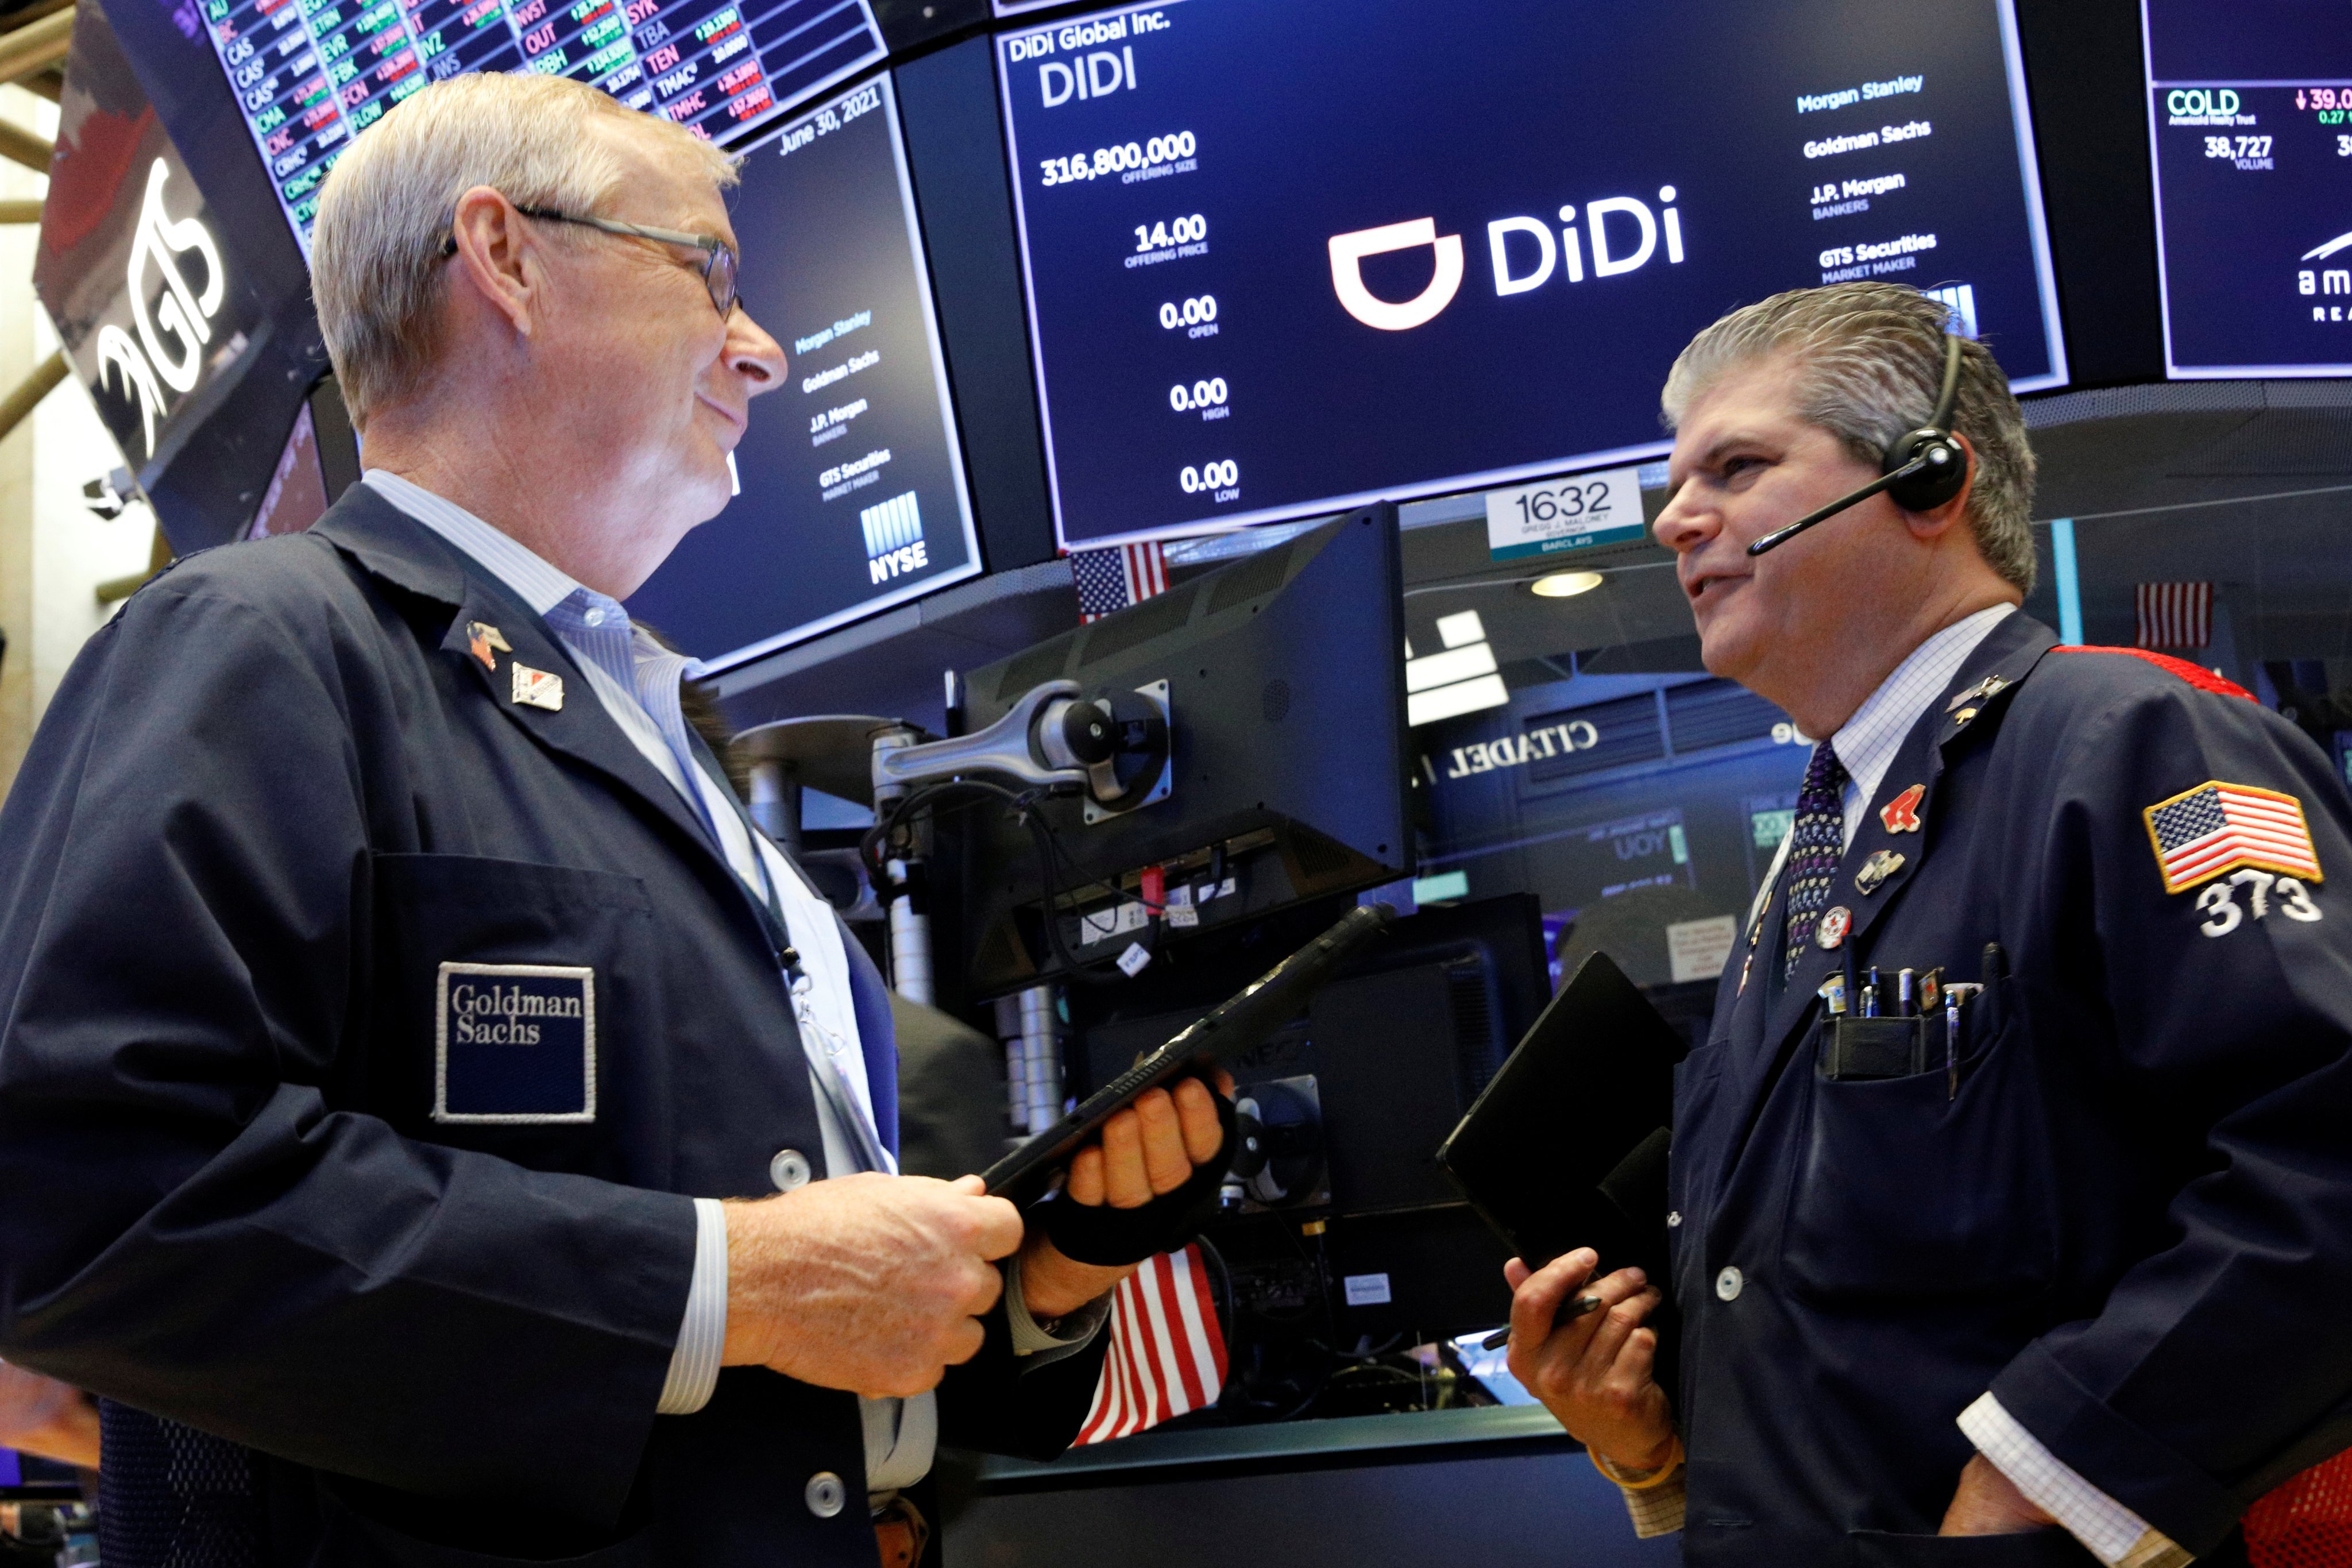 Traders work during the Didi IPO on the New York Stock Exchange on June 30. Photo: Reuters